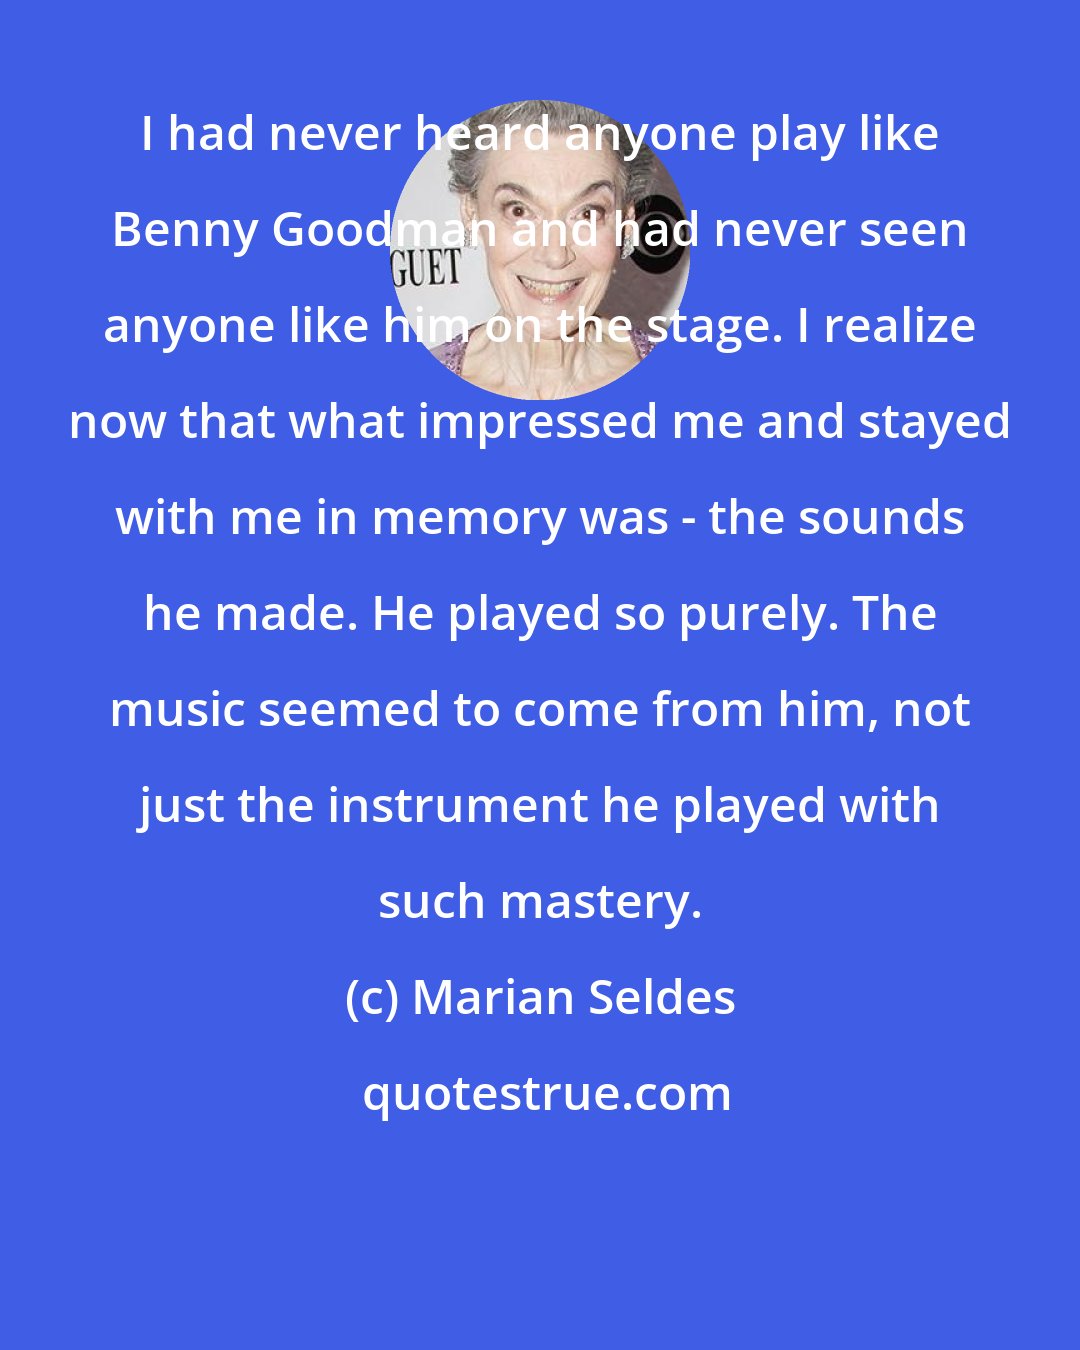 Marian Seldes: I had never heard anyone play like Benny Goodman and had never seen anyone like him on the stage. I realize now that what impressed me and stayed with me in memory was - the sounds he made. He played so purely. The music seemed to come from him, not just the instrument he played with such mastery.